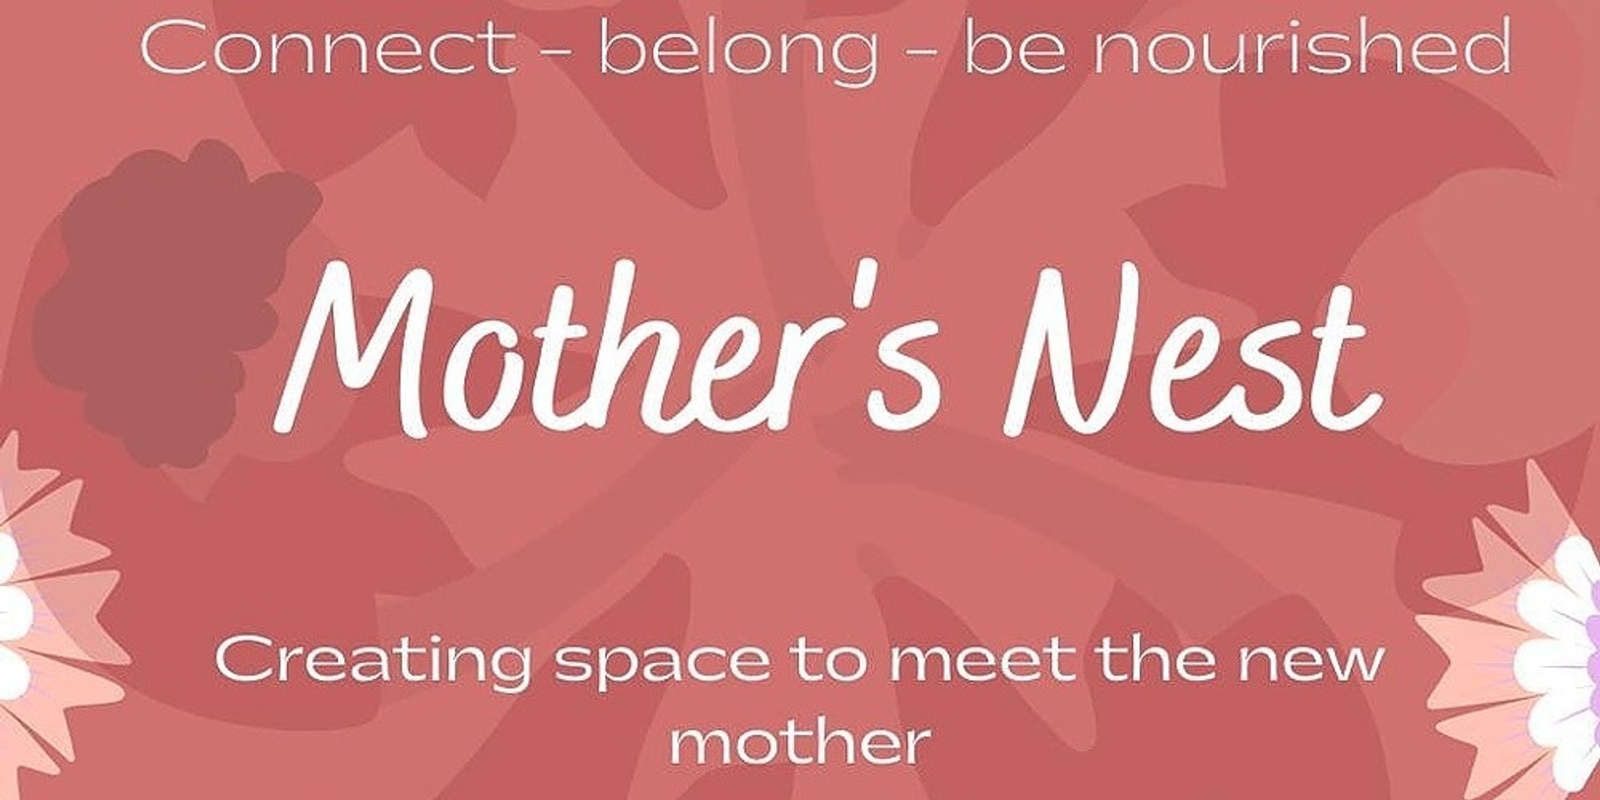 Banner image for Mother's Nest